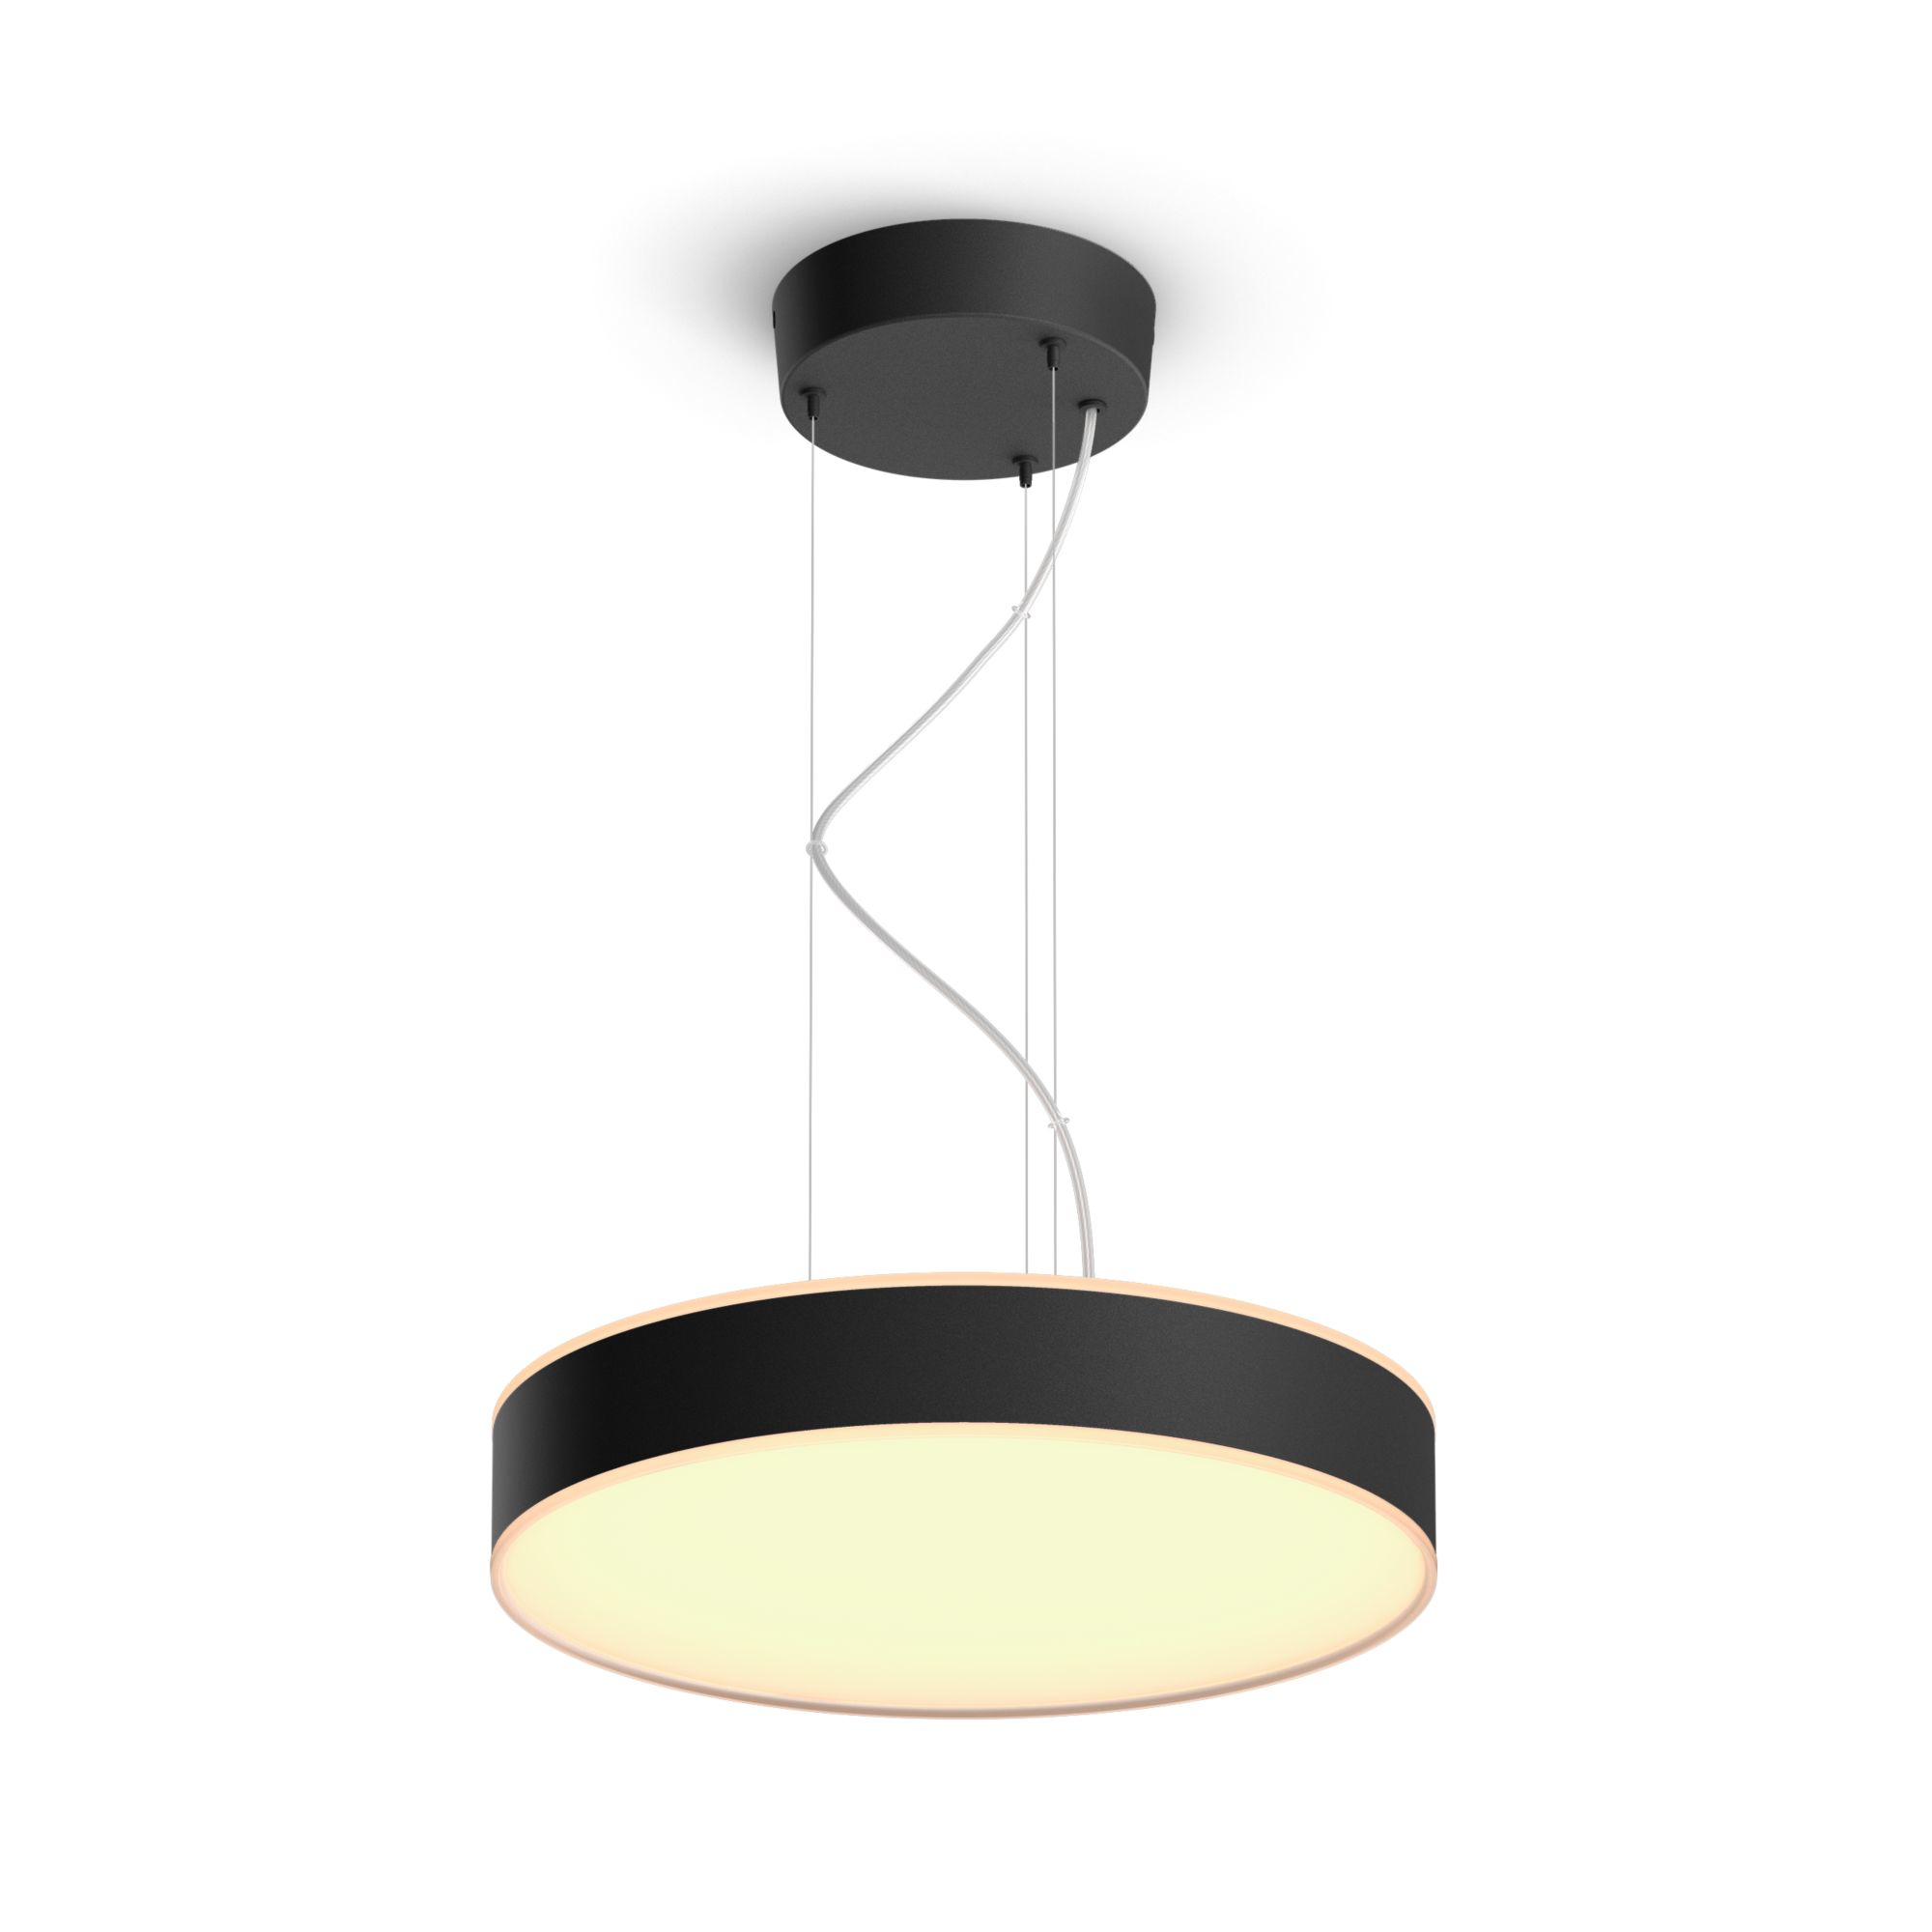 Philips by Signify Enrave hanglamp